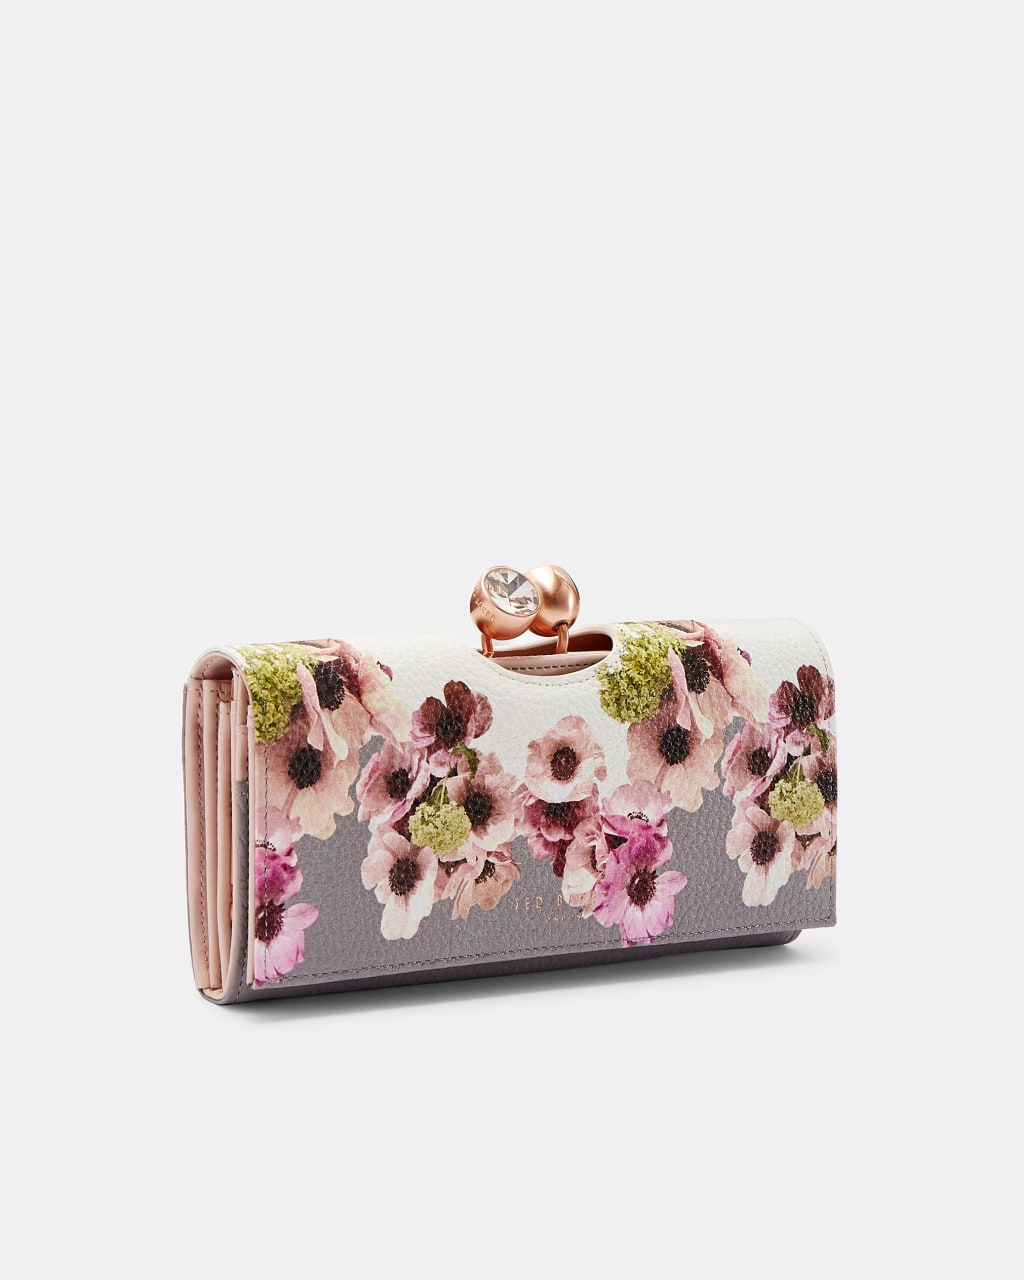 Ted Baker Clarita Floral Print Leather Matinee Purse, Pink/Multi, Compare